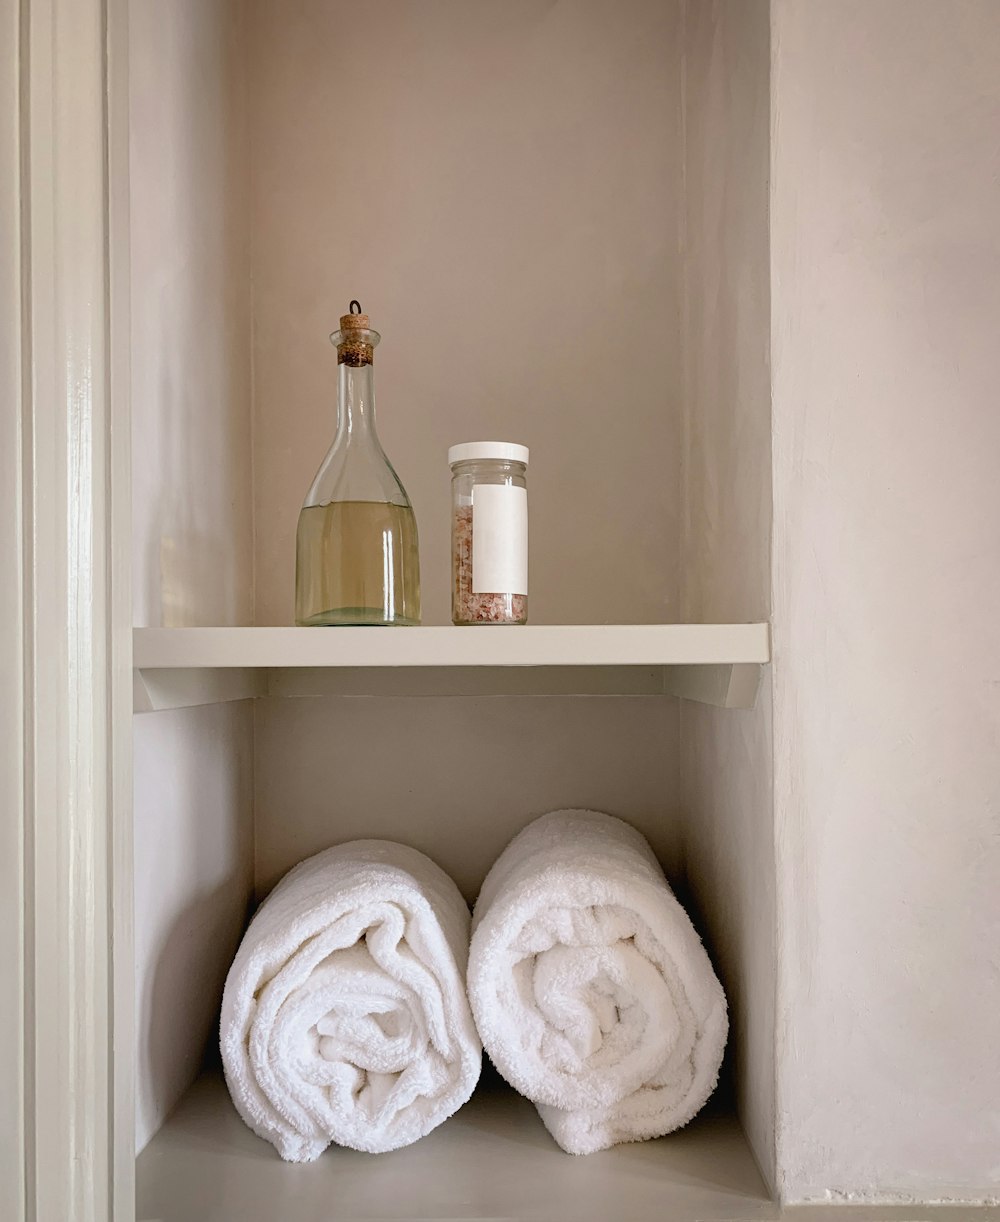 a shelf with two white towels and a bottle